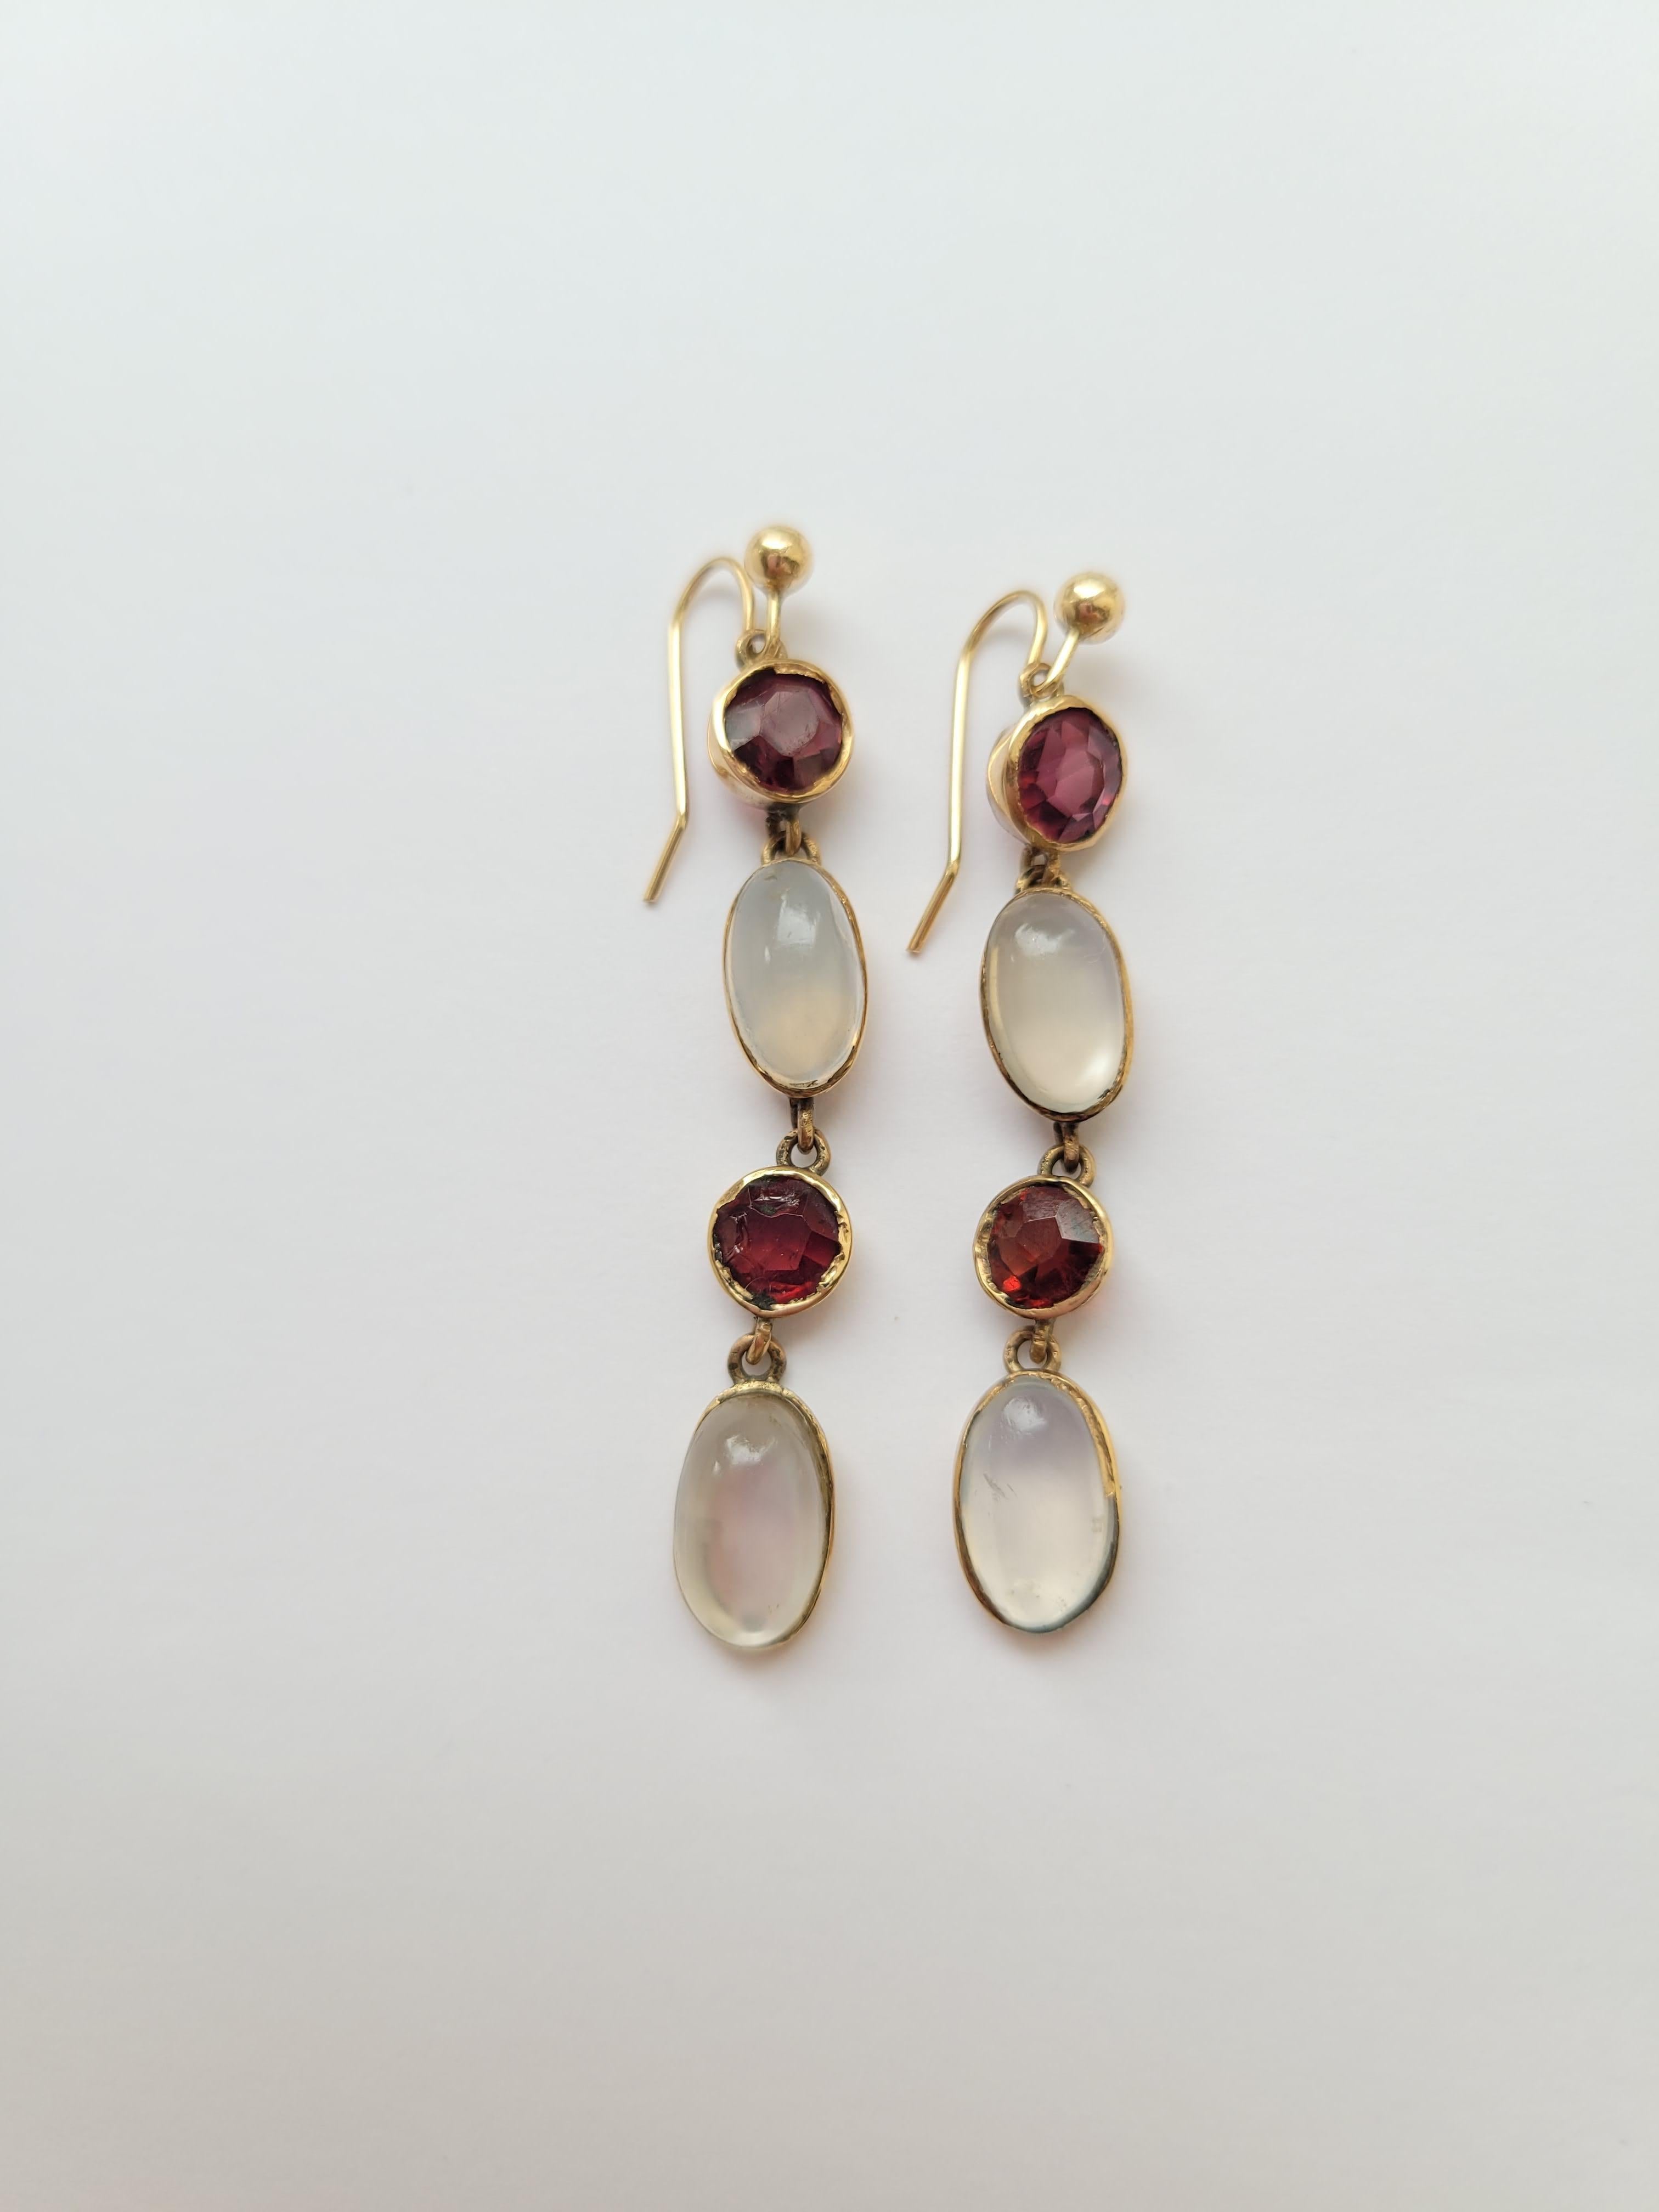 A pair of Antique Edwardian circa early 1900s 9 Carat Gold, Moonstone and Garnet drop earrings. Earrings completed with a brand new 9 Carat Gold shepherd hook wires. English origin. 

Total drop including hooks 47mm.
Weight 4.0gr.
Unmarked tested,